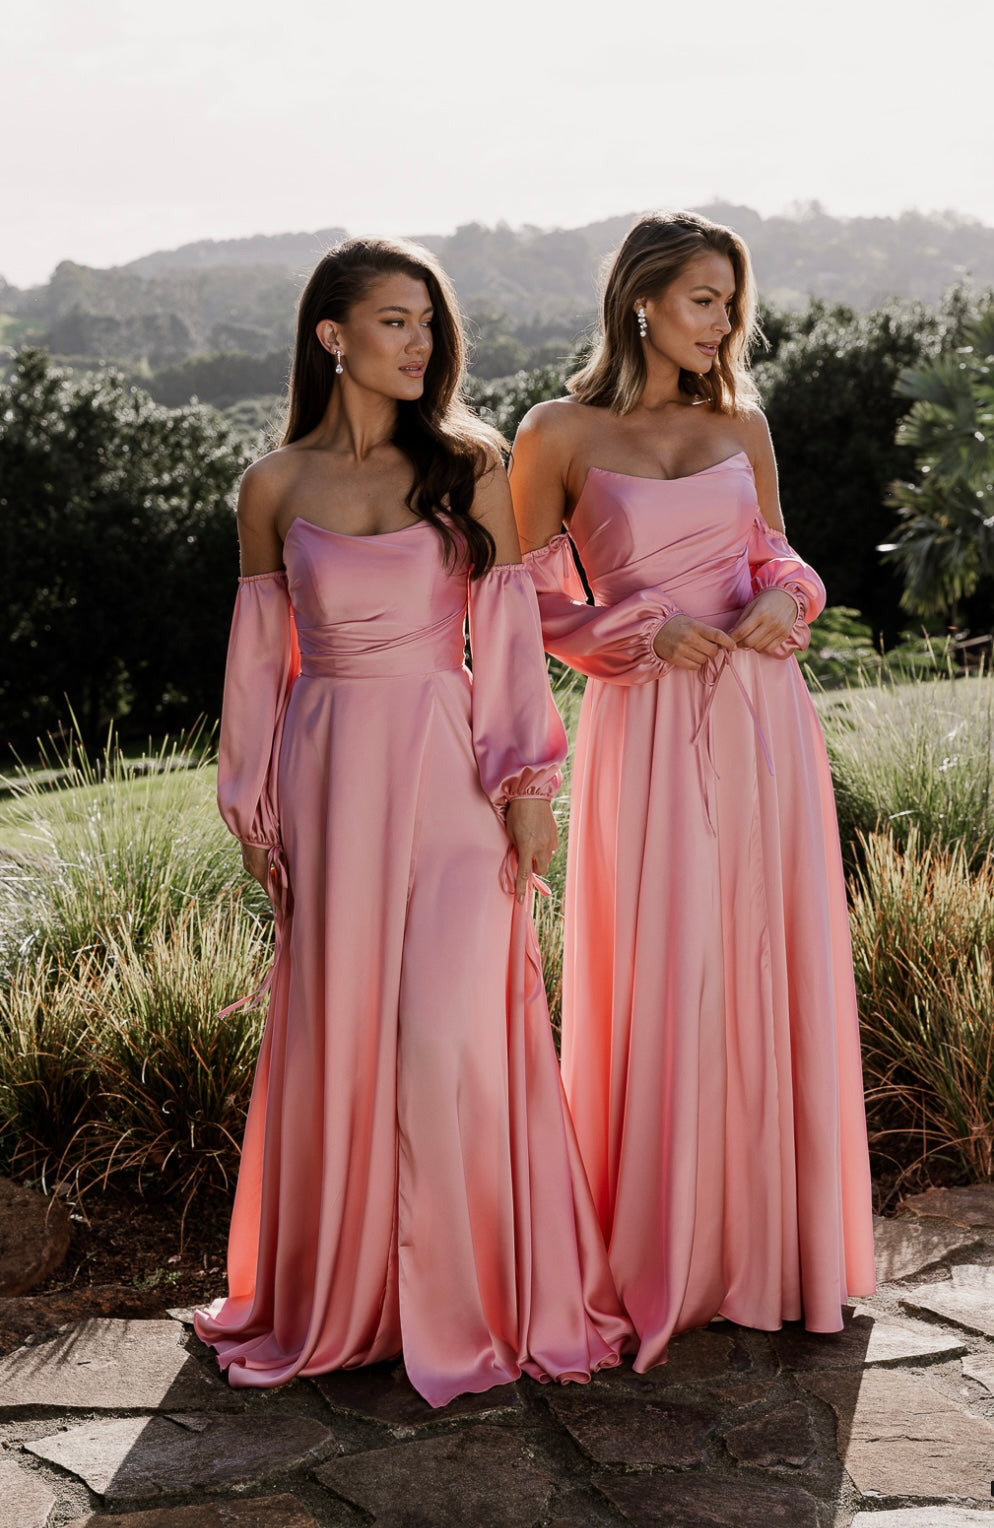 Violette by Tania Olsen Bridesmaid dress available in 12 Colours